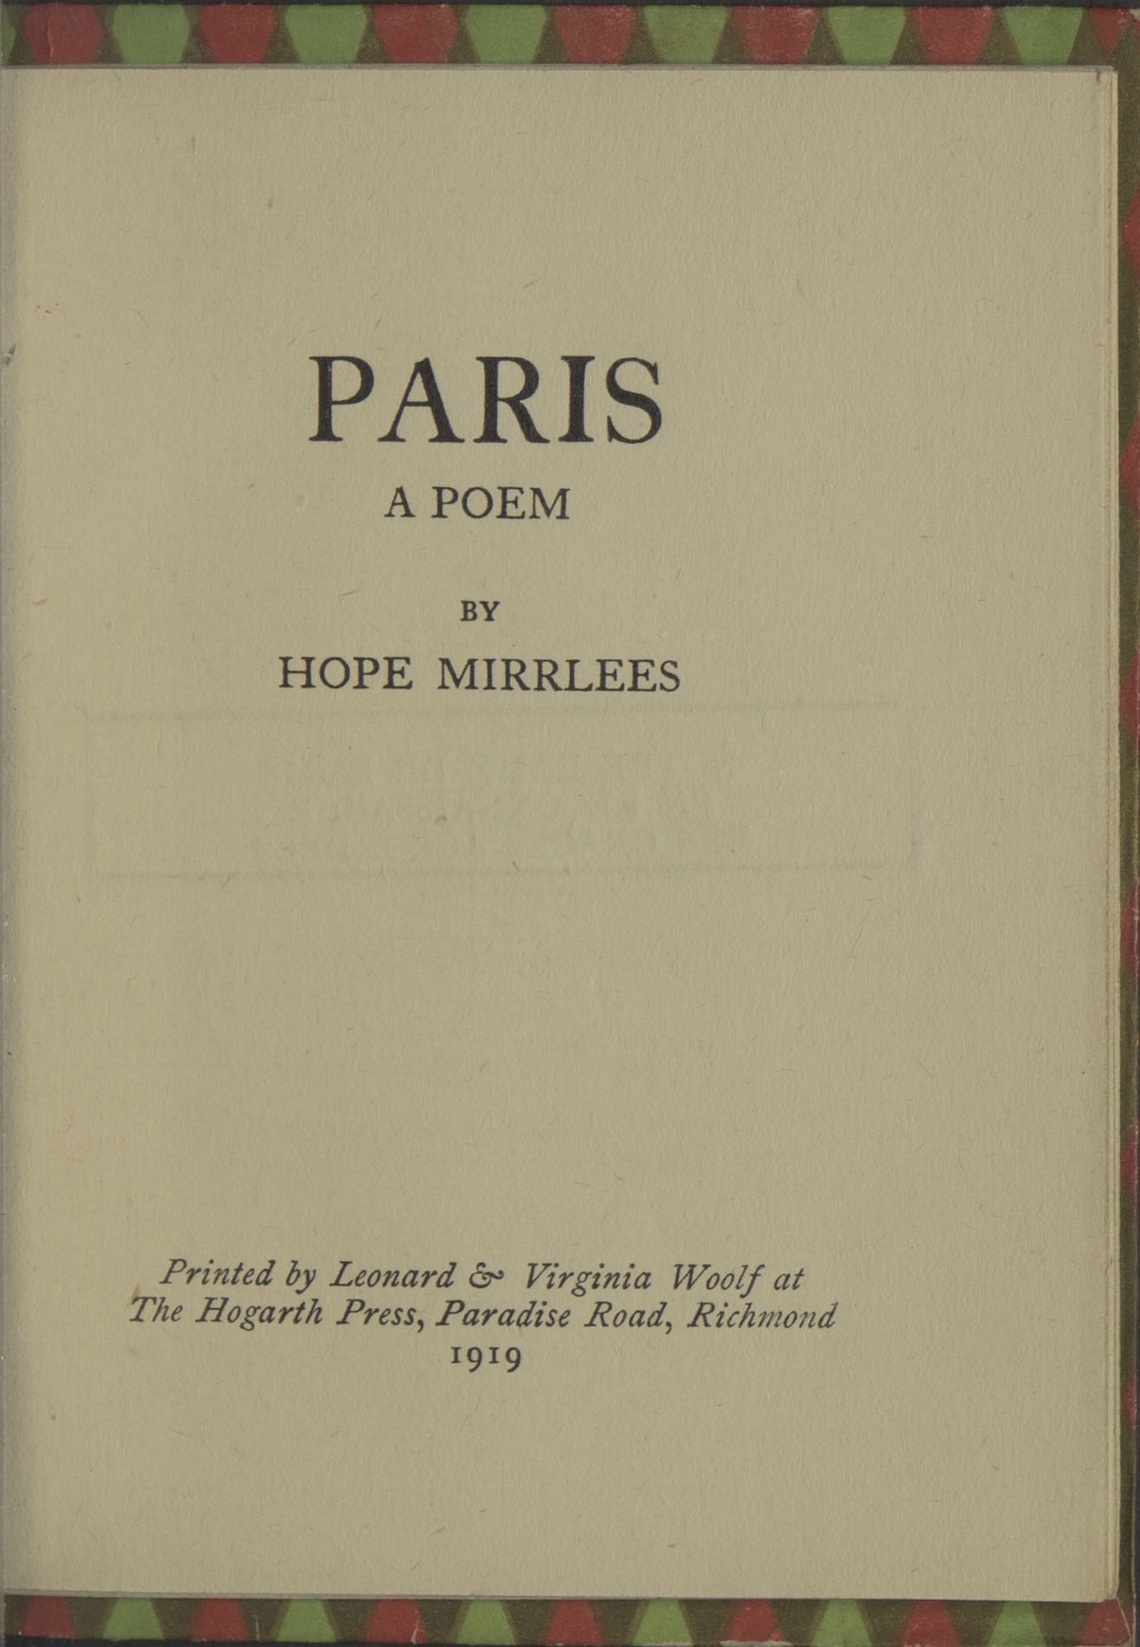 Scan of the title page of Paris